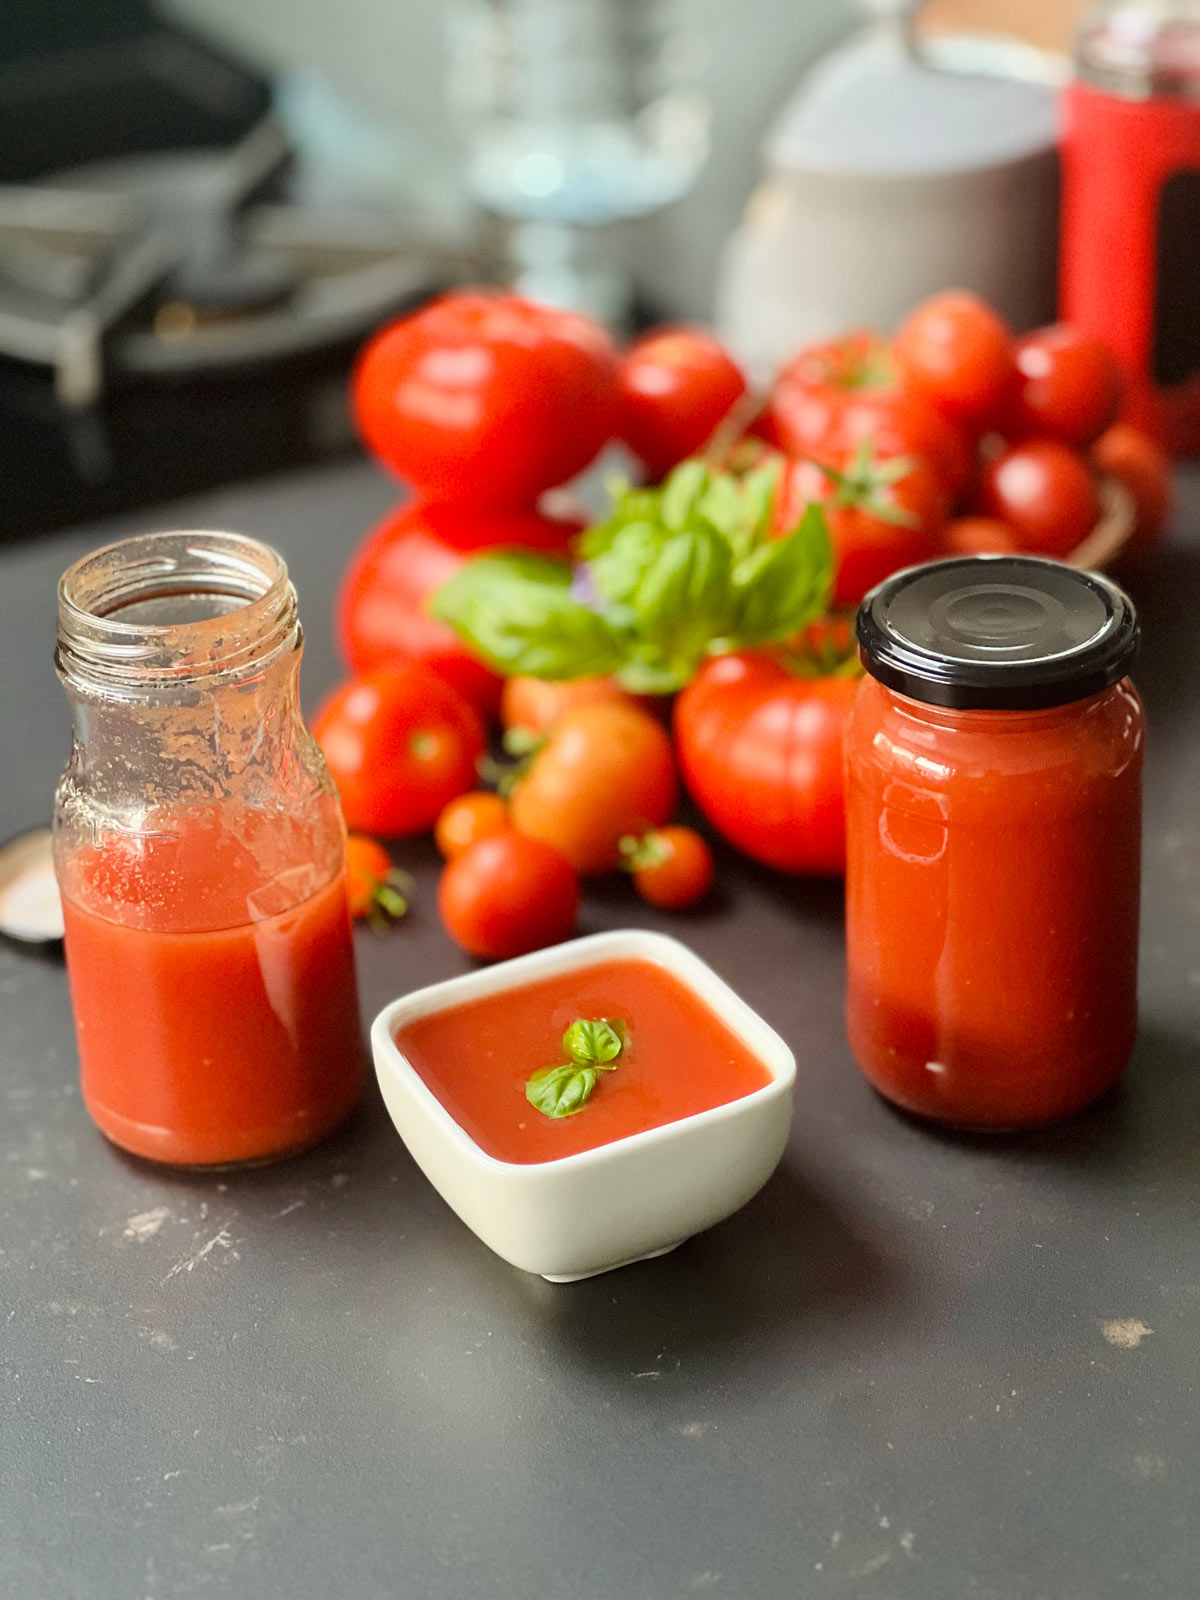 Two jars, set aside, one full one halfway filled with passata, and the white ceramic dish in the middle containing tomato, passata and some basil leaves.